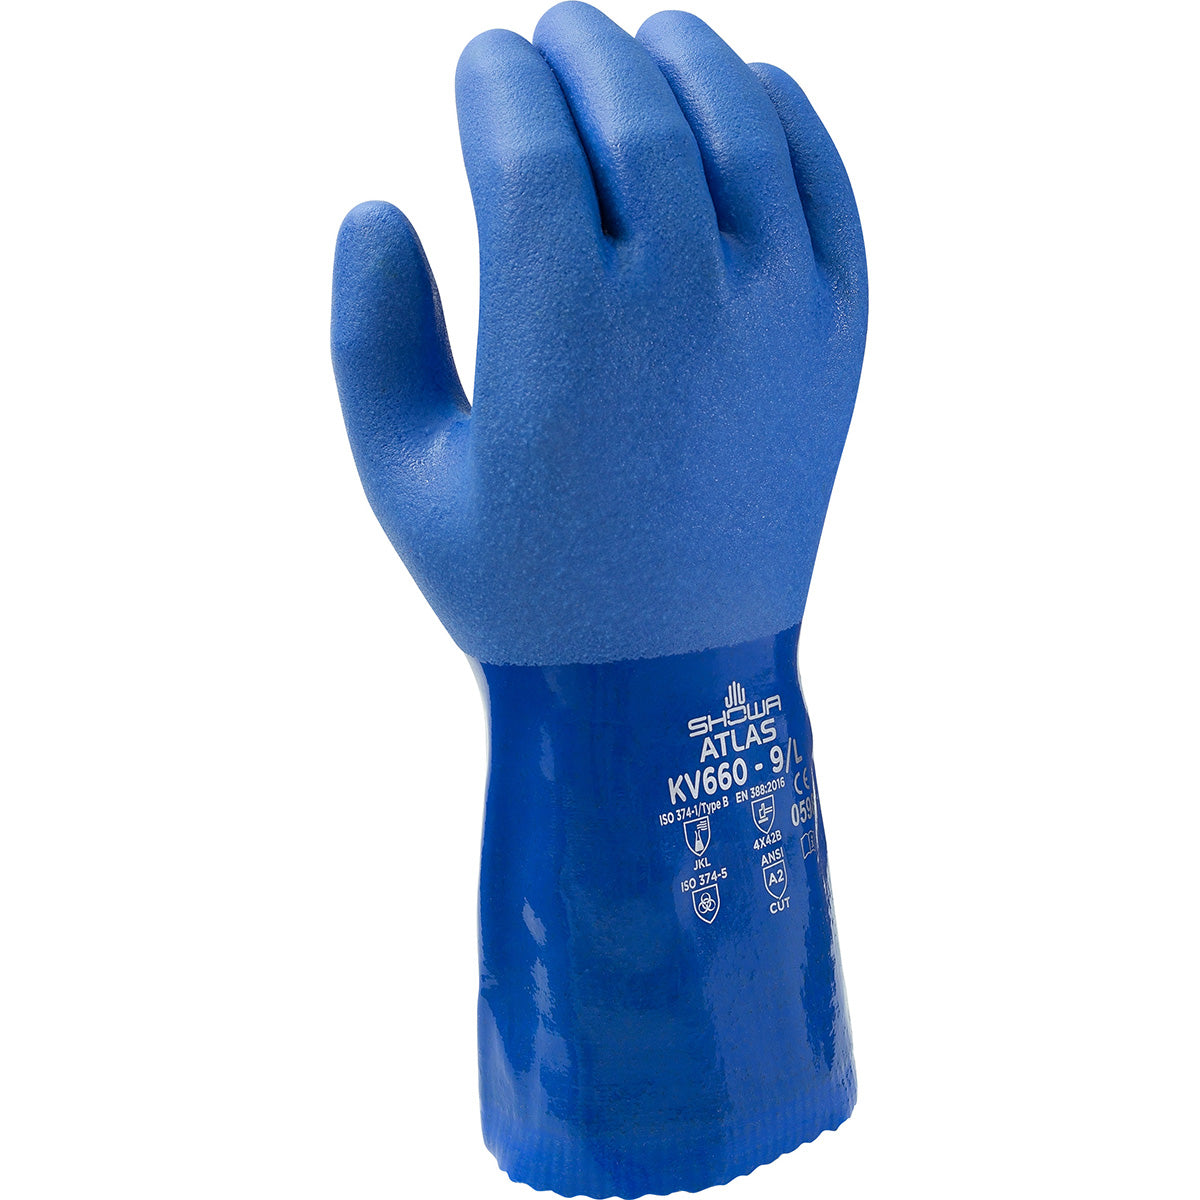 Showa KV660 Super Flexible Triple-Dipped PVC Chemical Resistant Safety Glove with Kevlar Liner (Pack of 12 Pairs) - Cut Level A2 Work Gloves and Hats - Cleanflow